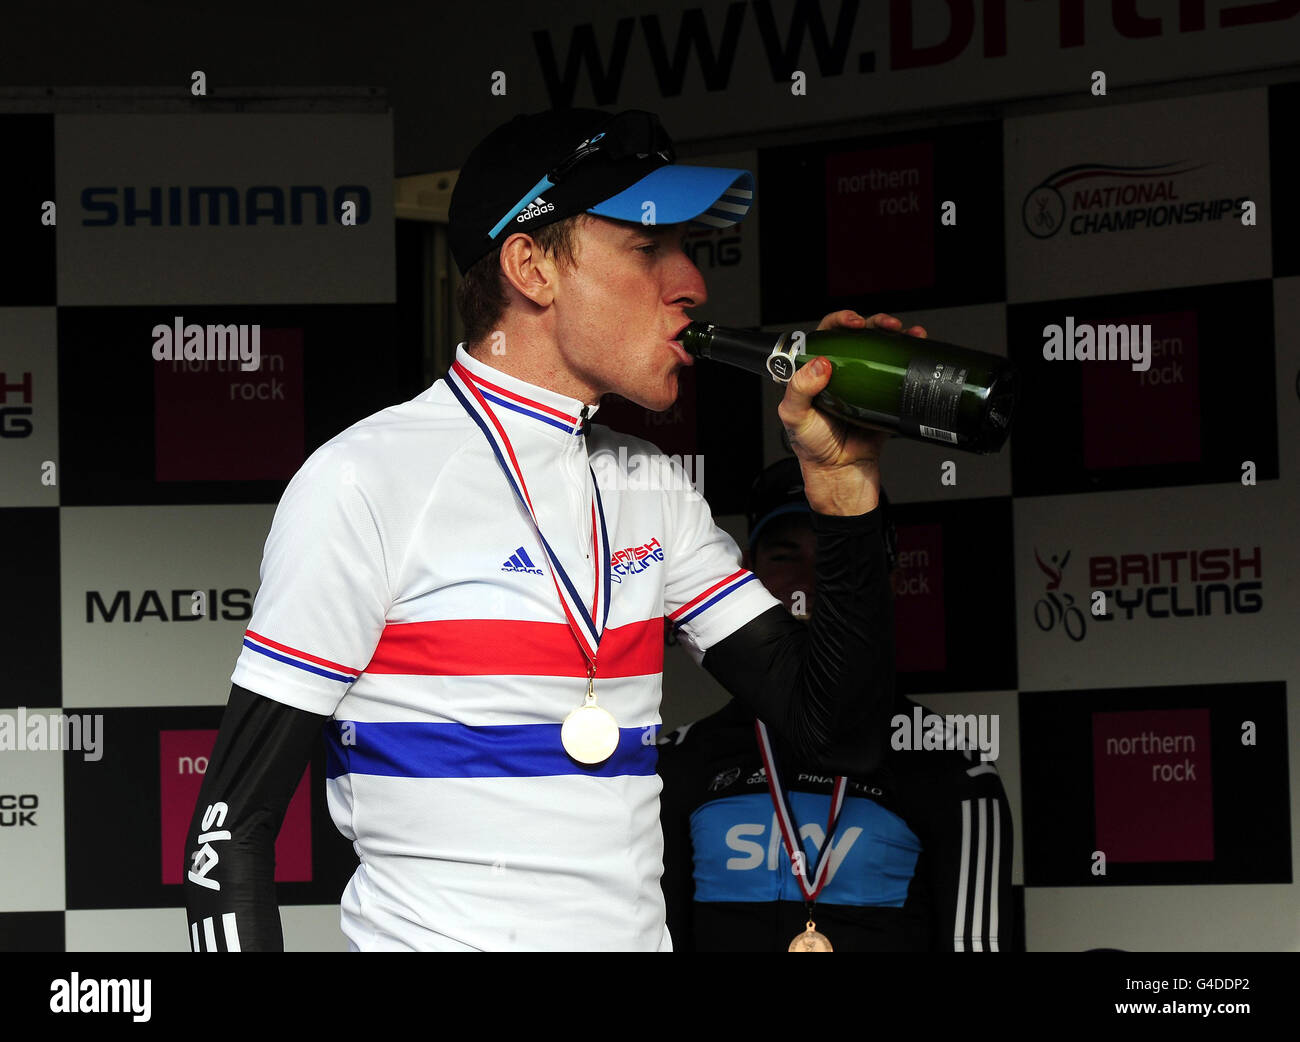 Bradley Wiggins of the Sky Cycling Team in his National Champions Jersey following his victory in the Men's National Elite Road Race Championships in Stamfordham. Stock Photo